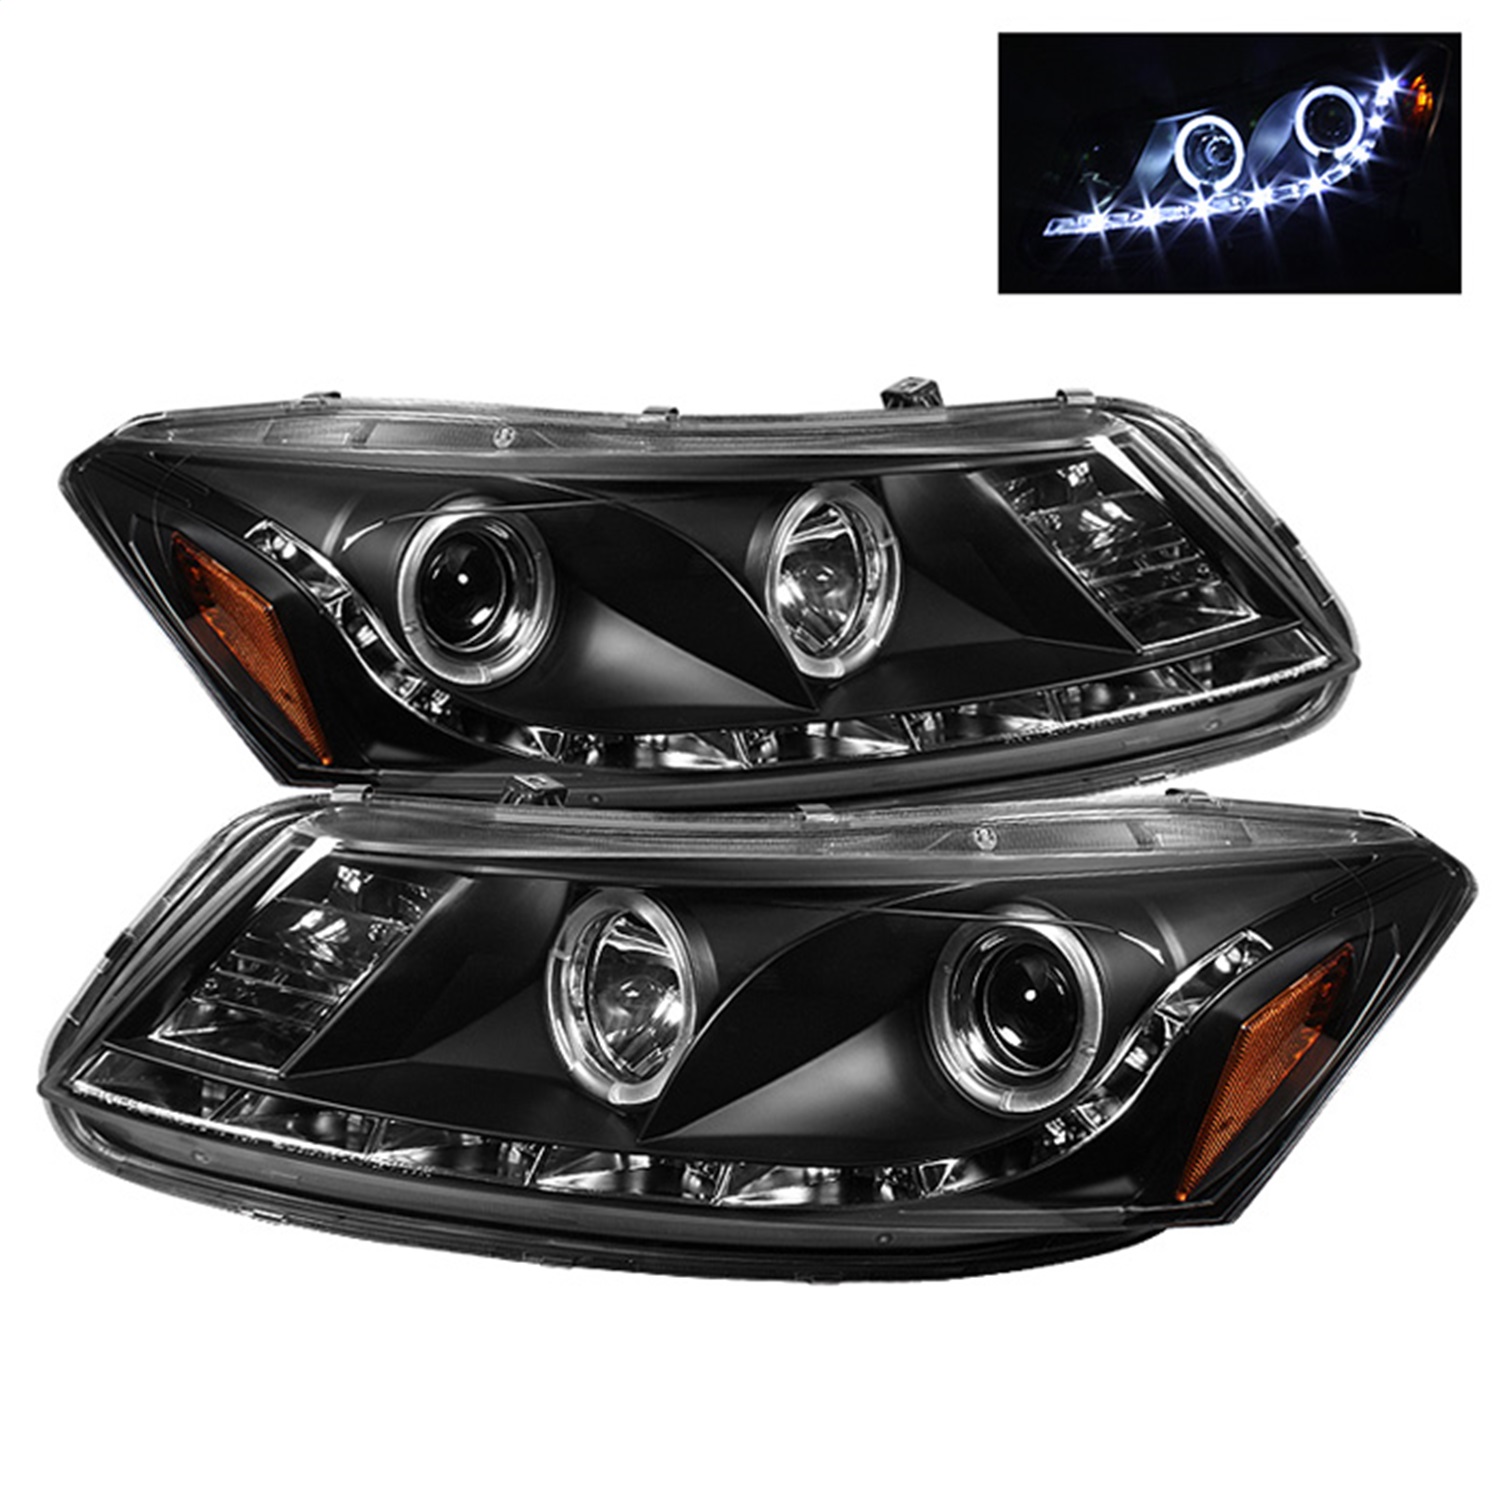 Spyder Auto 5010667 DRL LED Projector Headlights Fits 08-12 Accord